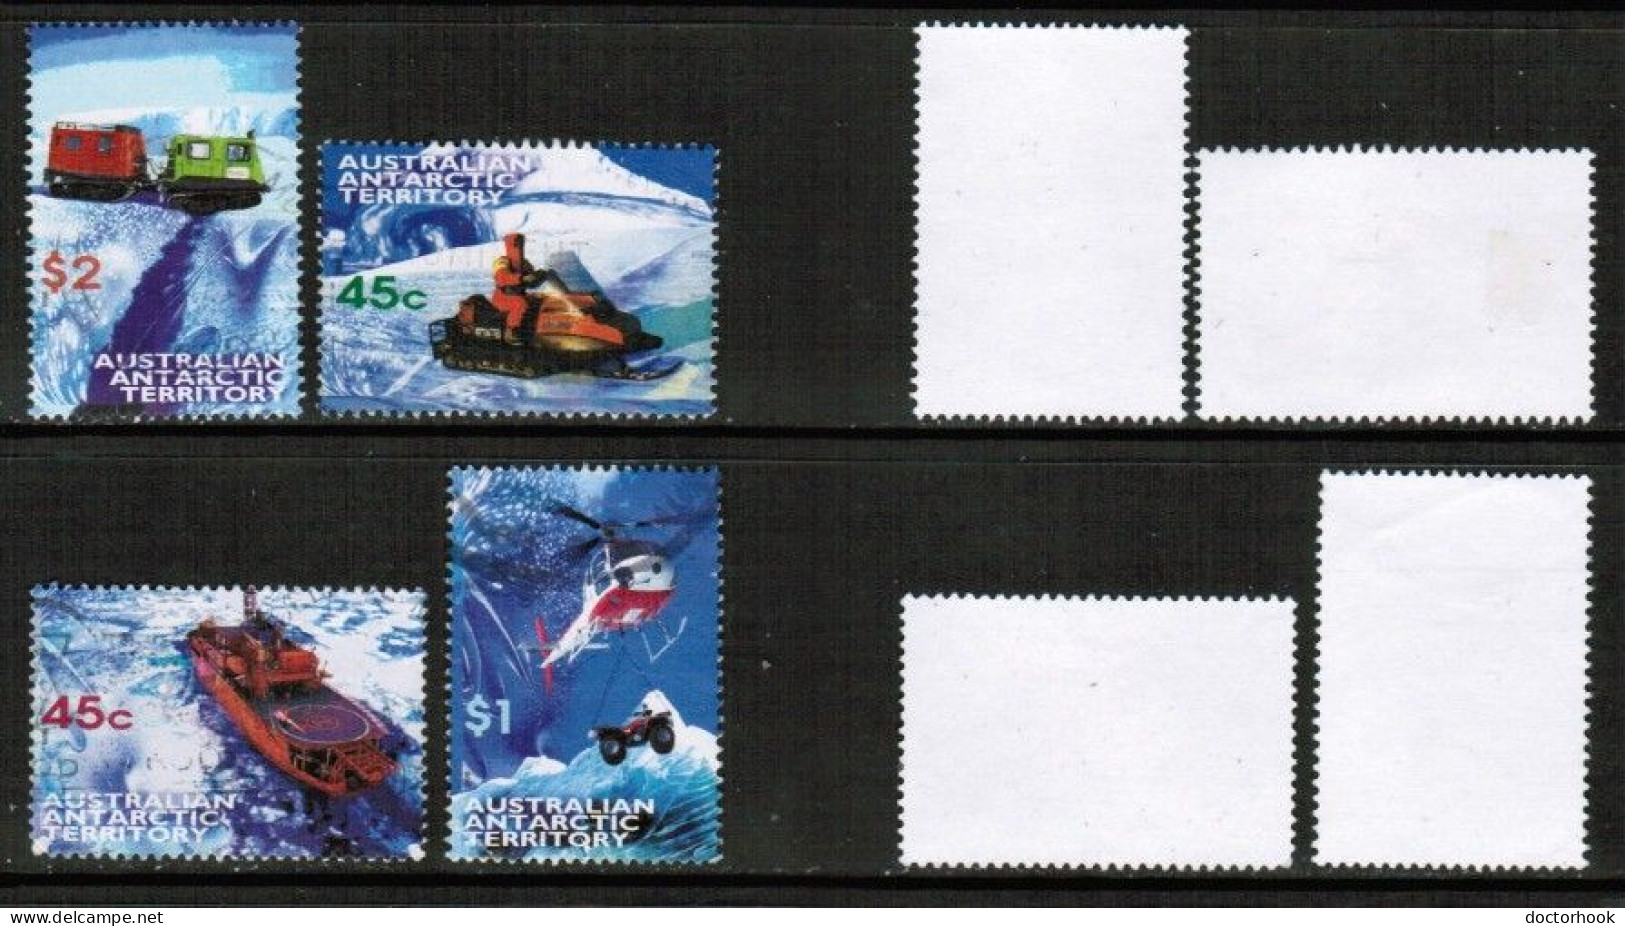 AUSTRALIAN ANTARCTIC TERRITORY   Scott # L 107-10 USED (CONDITION AS PER SCAN) (Stamp Scan # 930-6) - Used Stamps